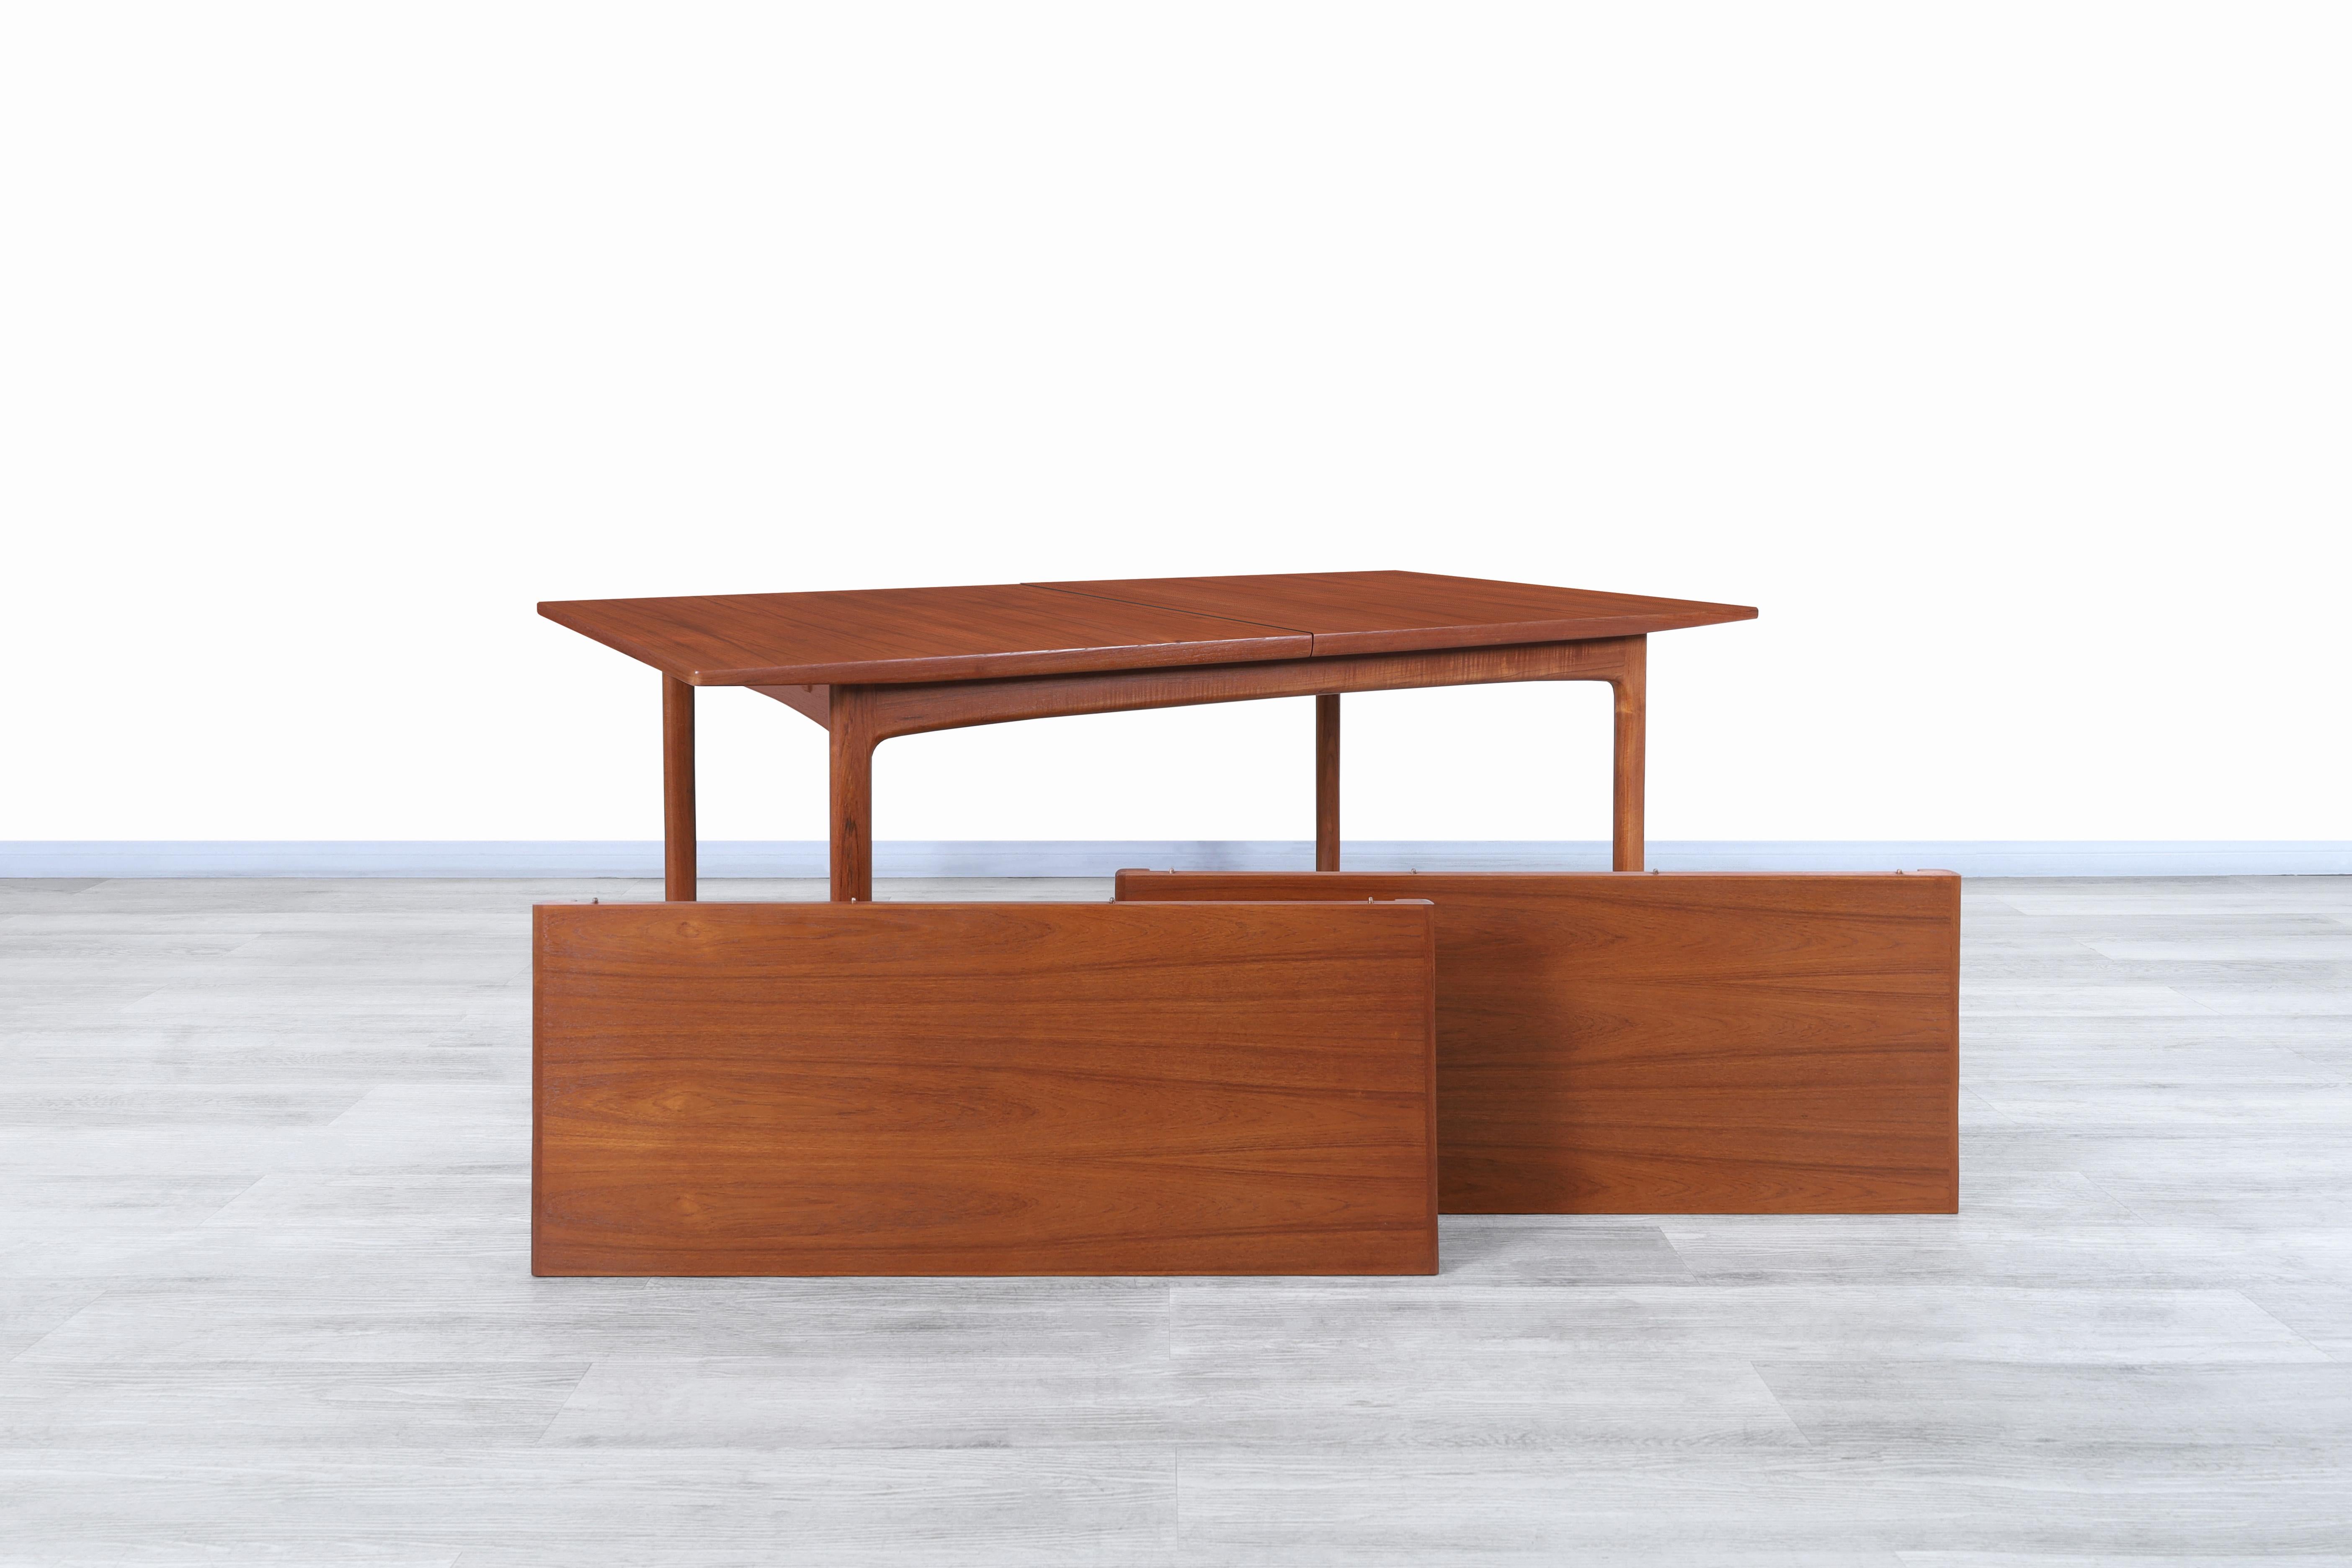 Fabulous mid century teak expanding dining table designed by Folke Ohlsson for DUX of Sweden, circa 1960s. This table has been made from the highest quality teak wood and features a distinctive design. This table stands out for its high